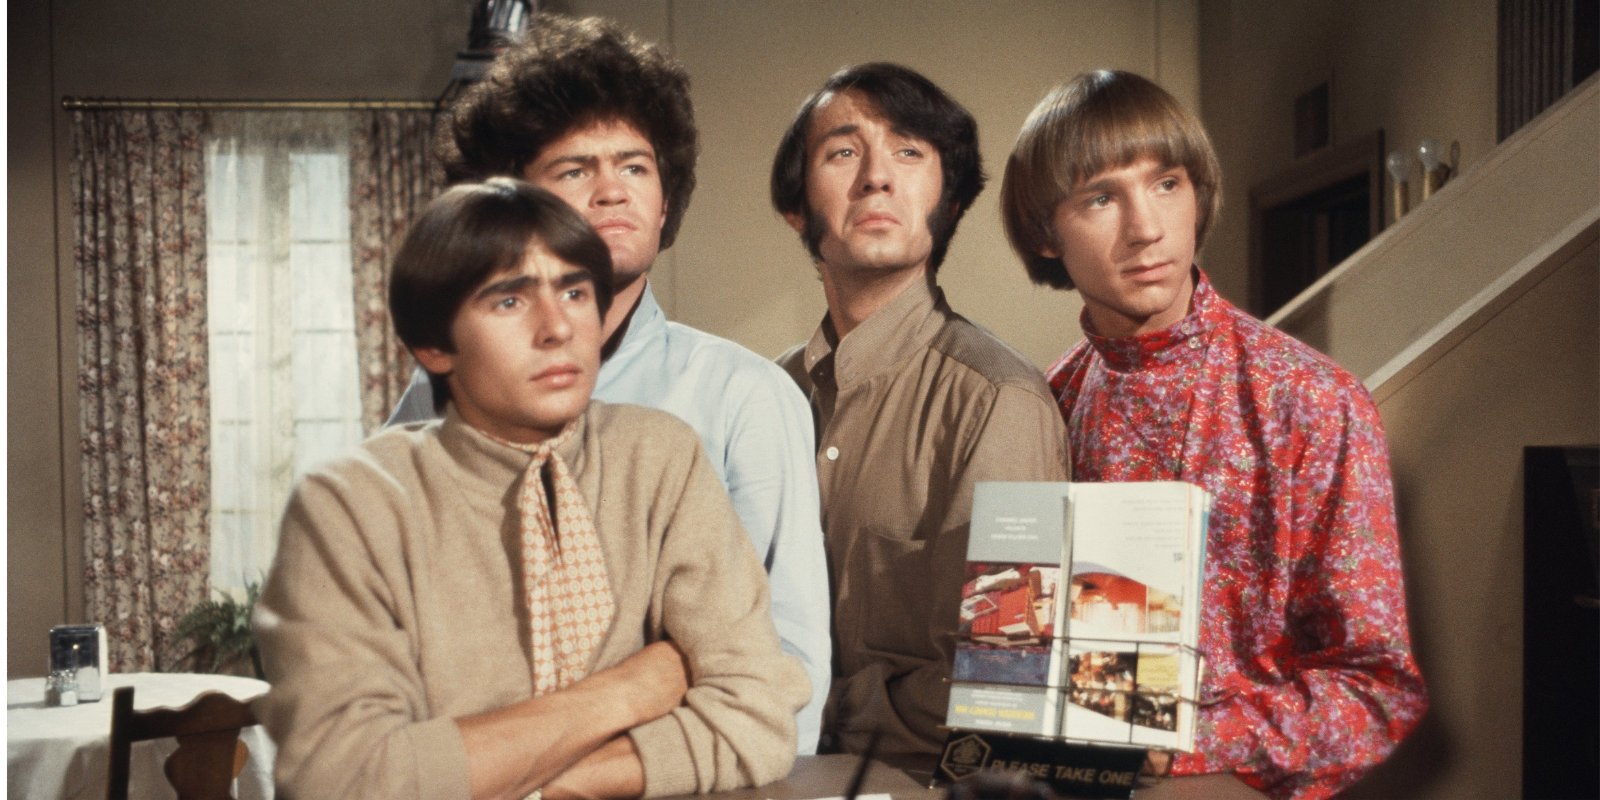 The Monkees on the set of their television show. The cast included Mike Nesmith, Micky Dolenz, Peter Tork, and Davy Jones.